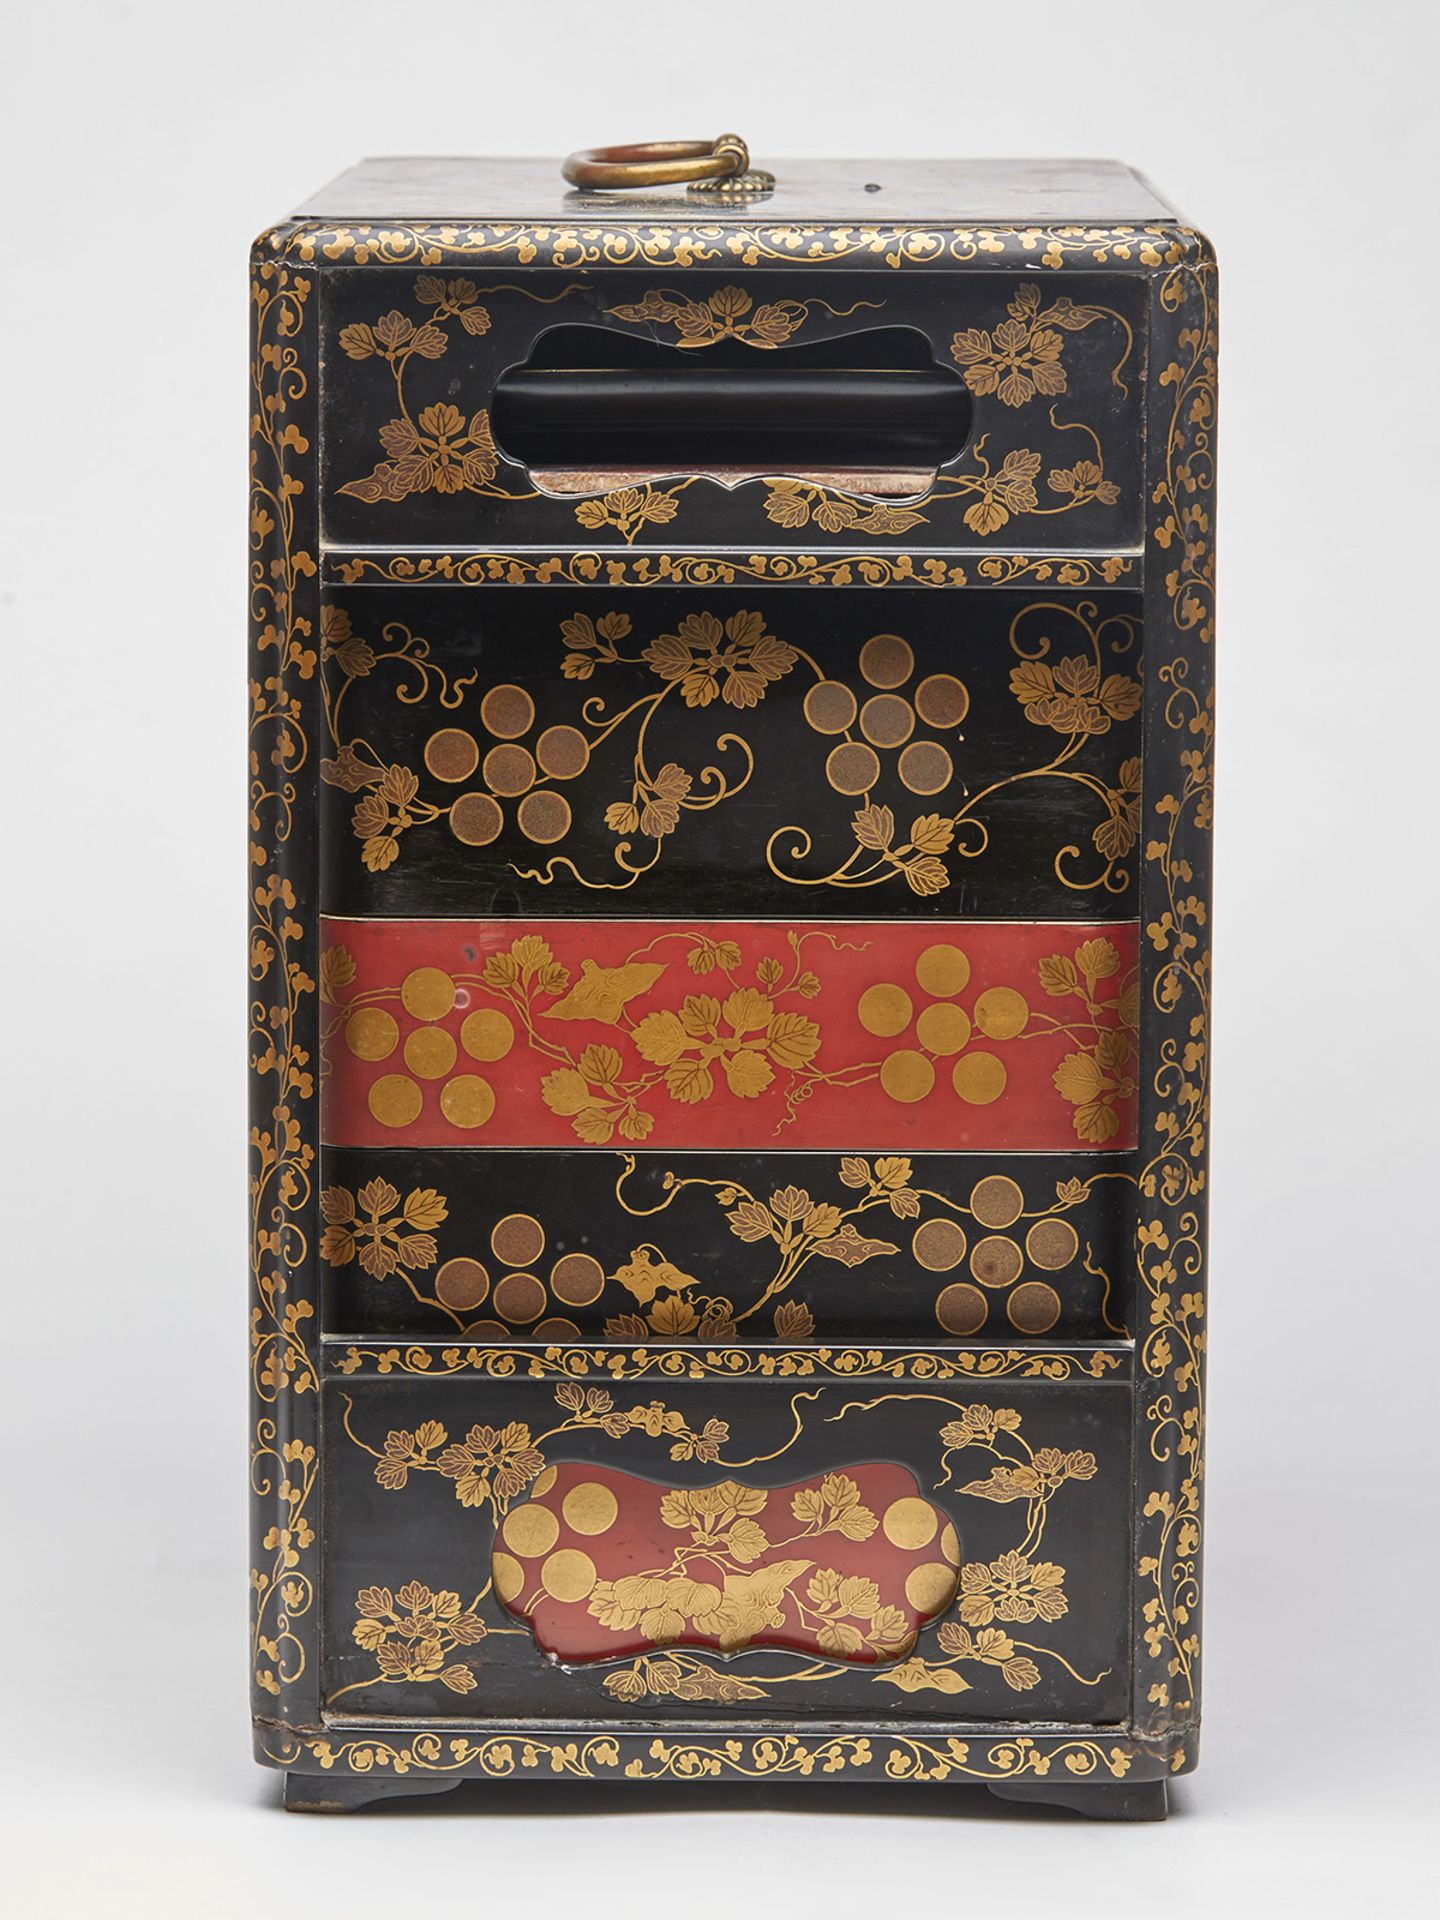 ANTIQUE JAPANESE COMPOSITE LACQUER SAGE-JUBAKO 19TH C. - Image 10 of 13